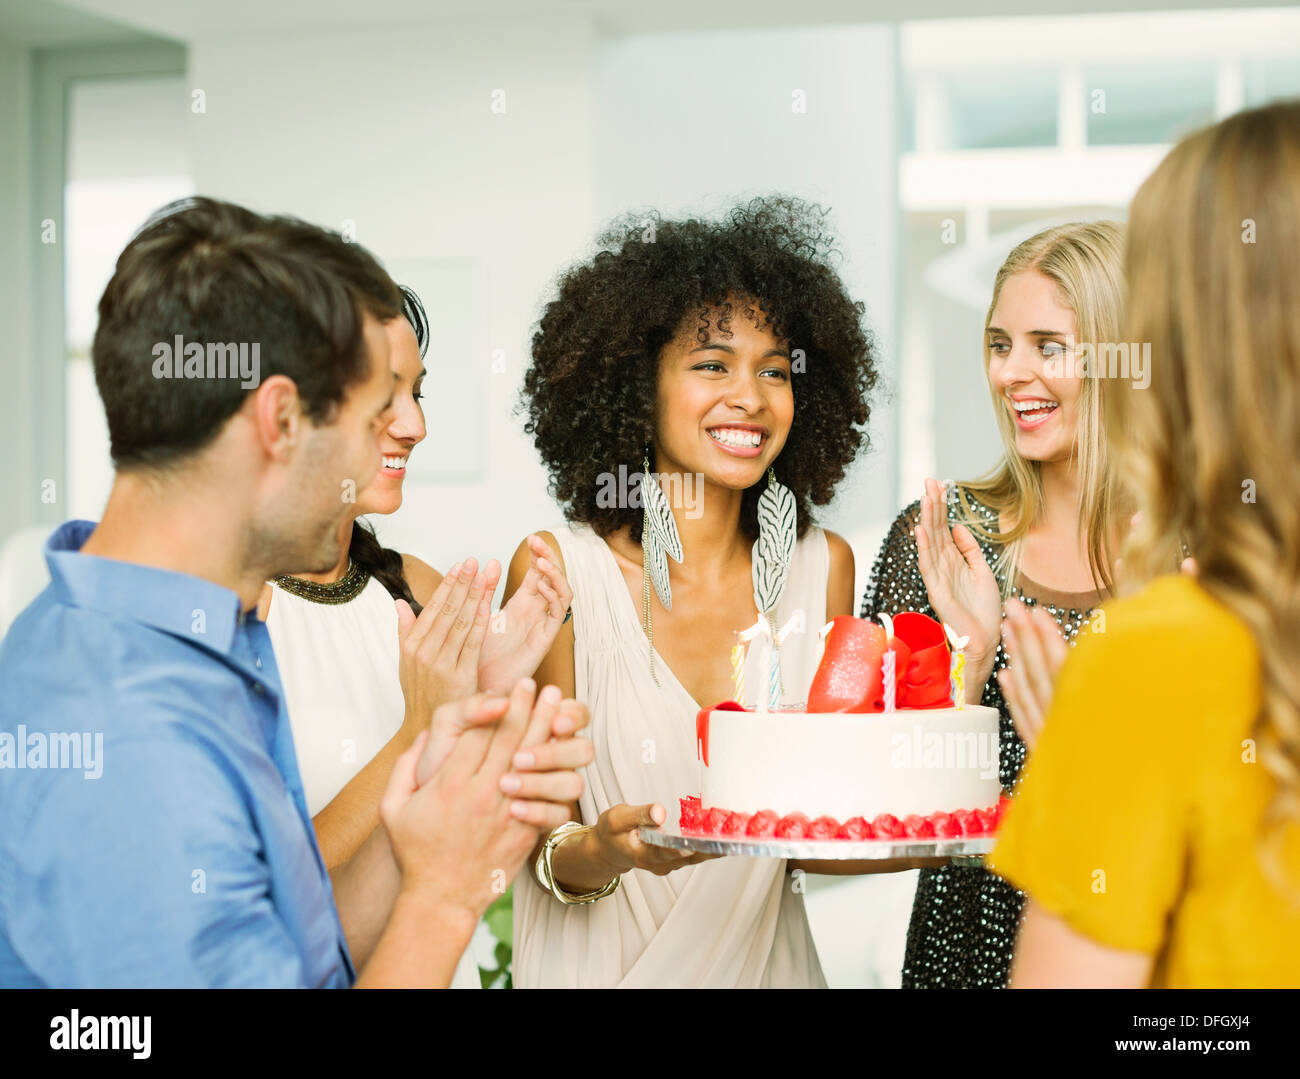 Friends clapping around woman with birthday cake Stock Photo